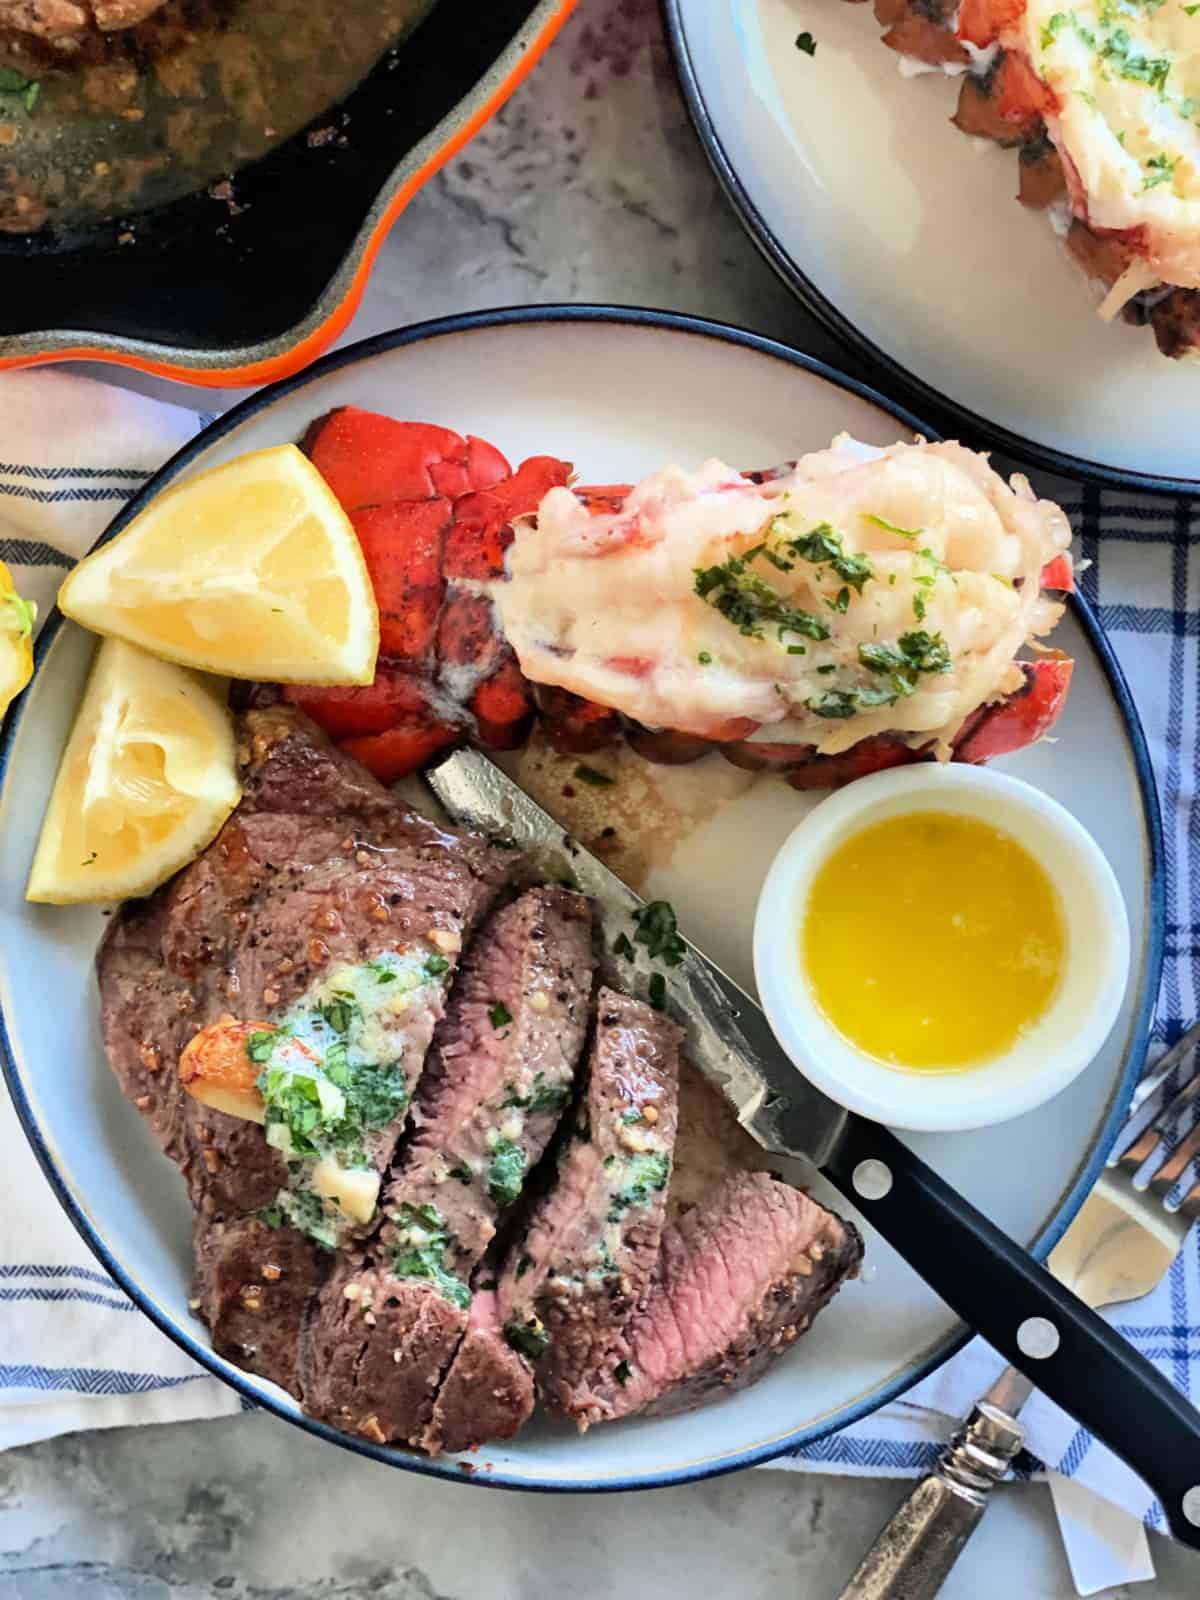 Sliced steak with a steak knife next to a lobster tail with lemon wedges and drawn butter.